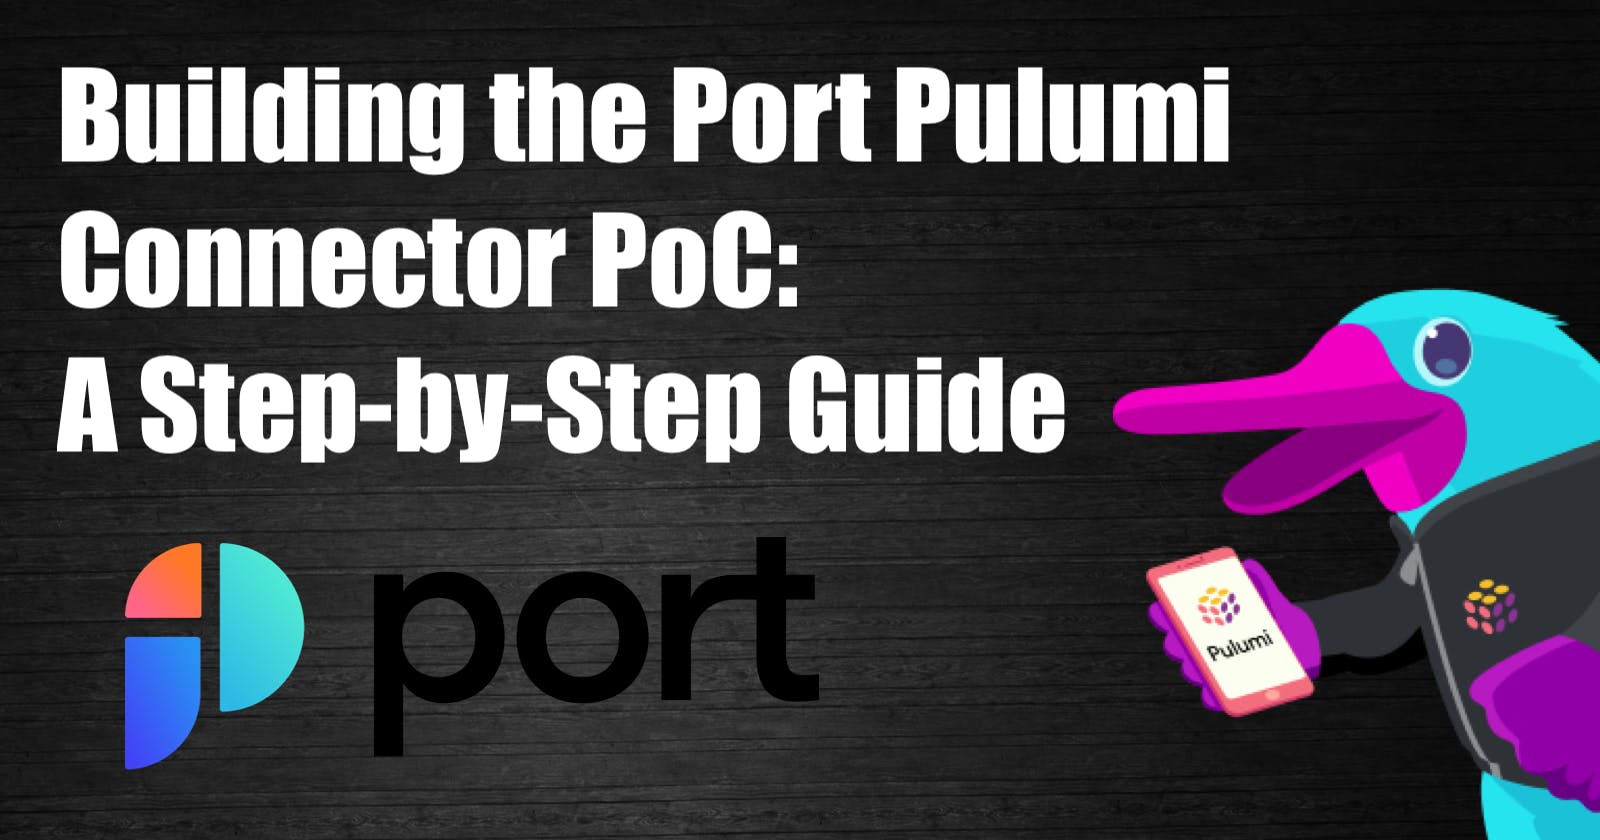 Building the Port Pulumi Connector PoC: A Step-by-Step Guide